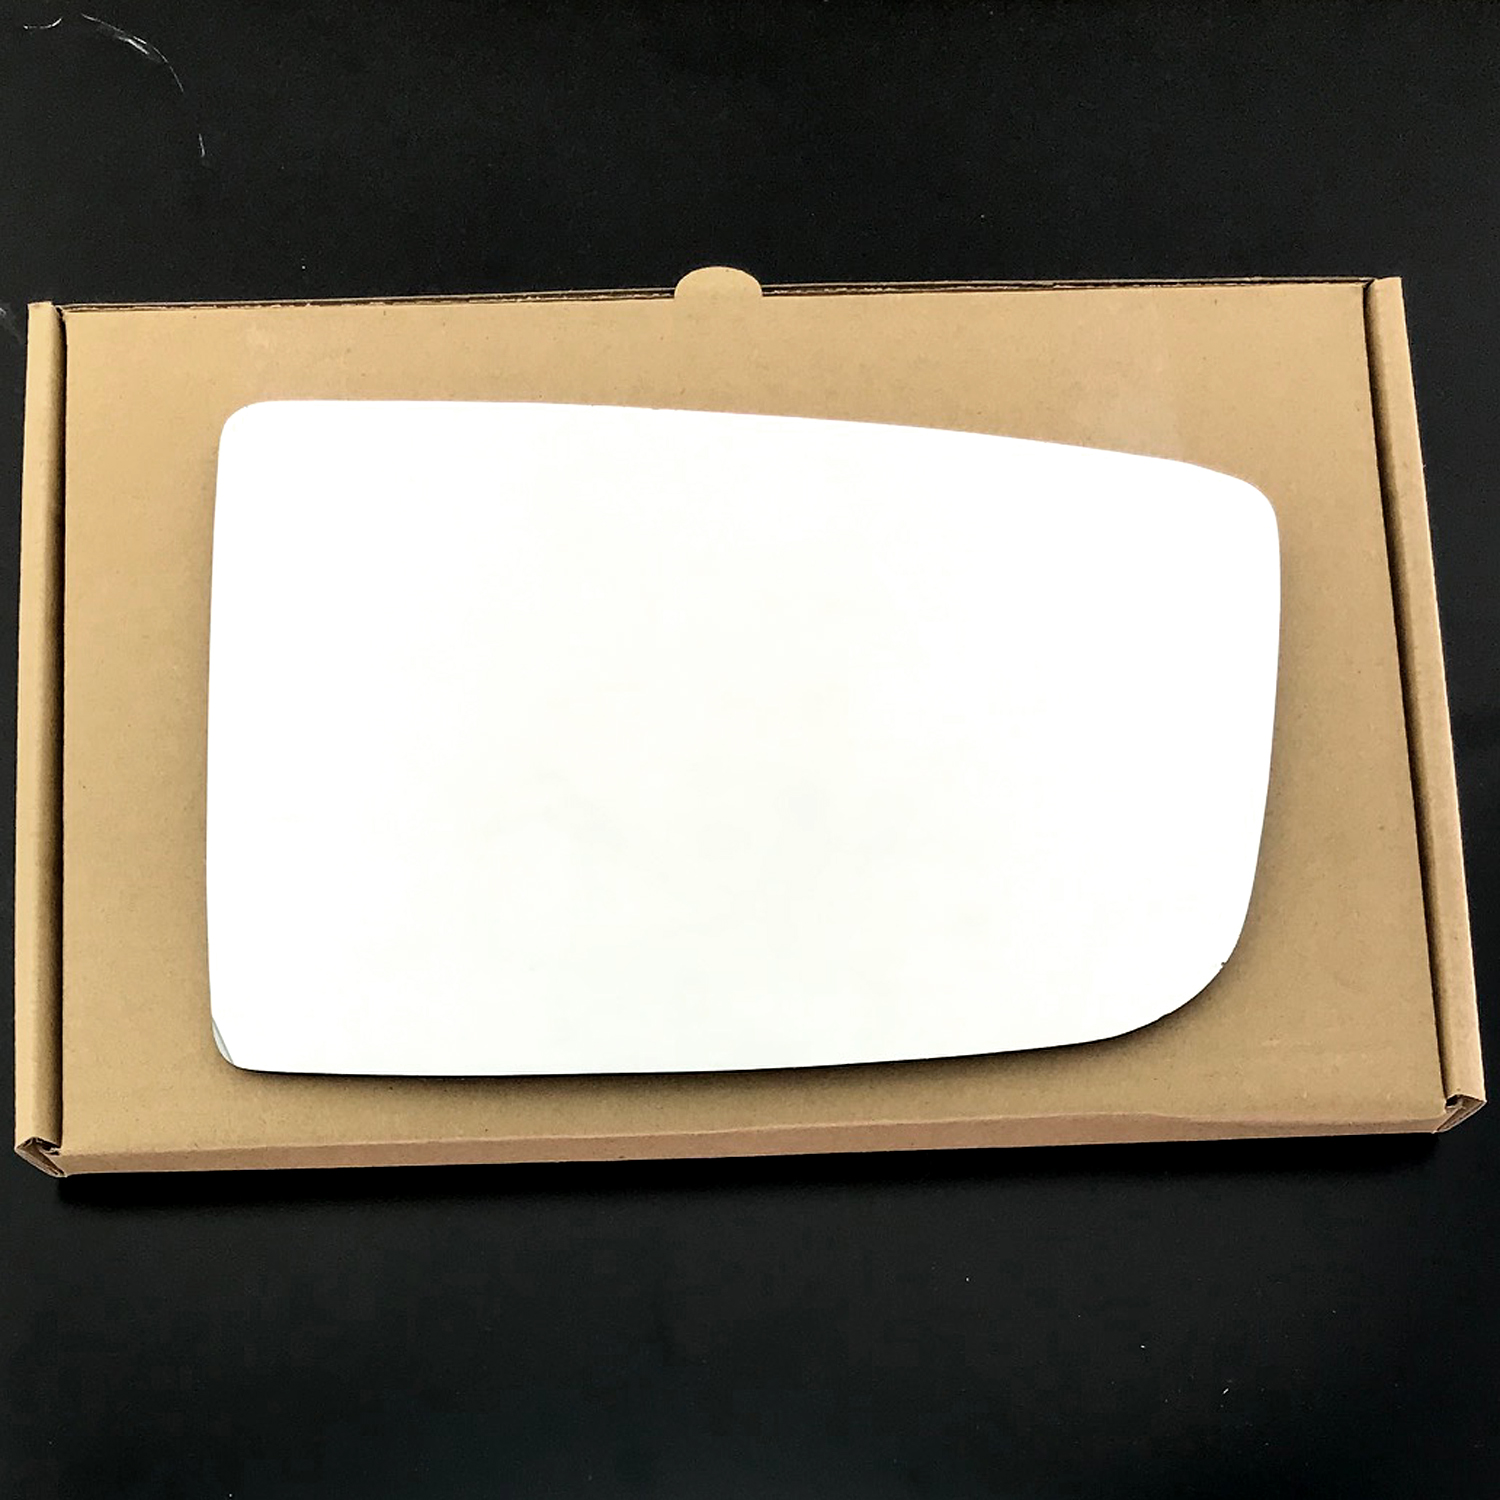 Mercedes Sprinter CHASSIS CAB Wing Mirror Glass RIGHT HAND ( UK Driver Side ) 2012 to 2017 – Convex Wing Mirror